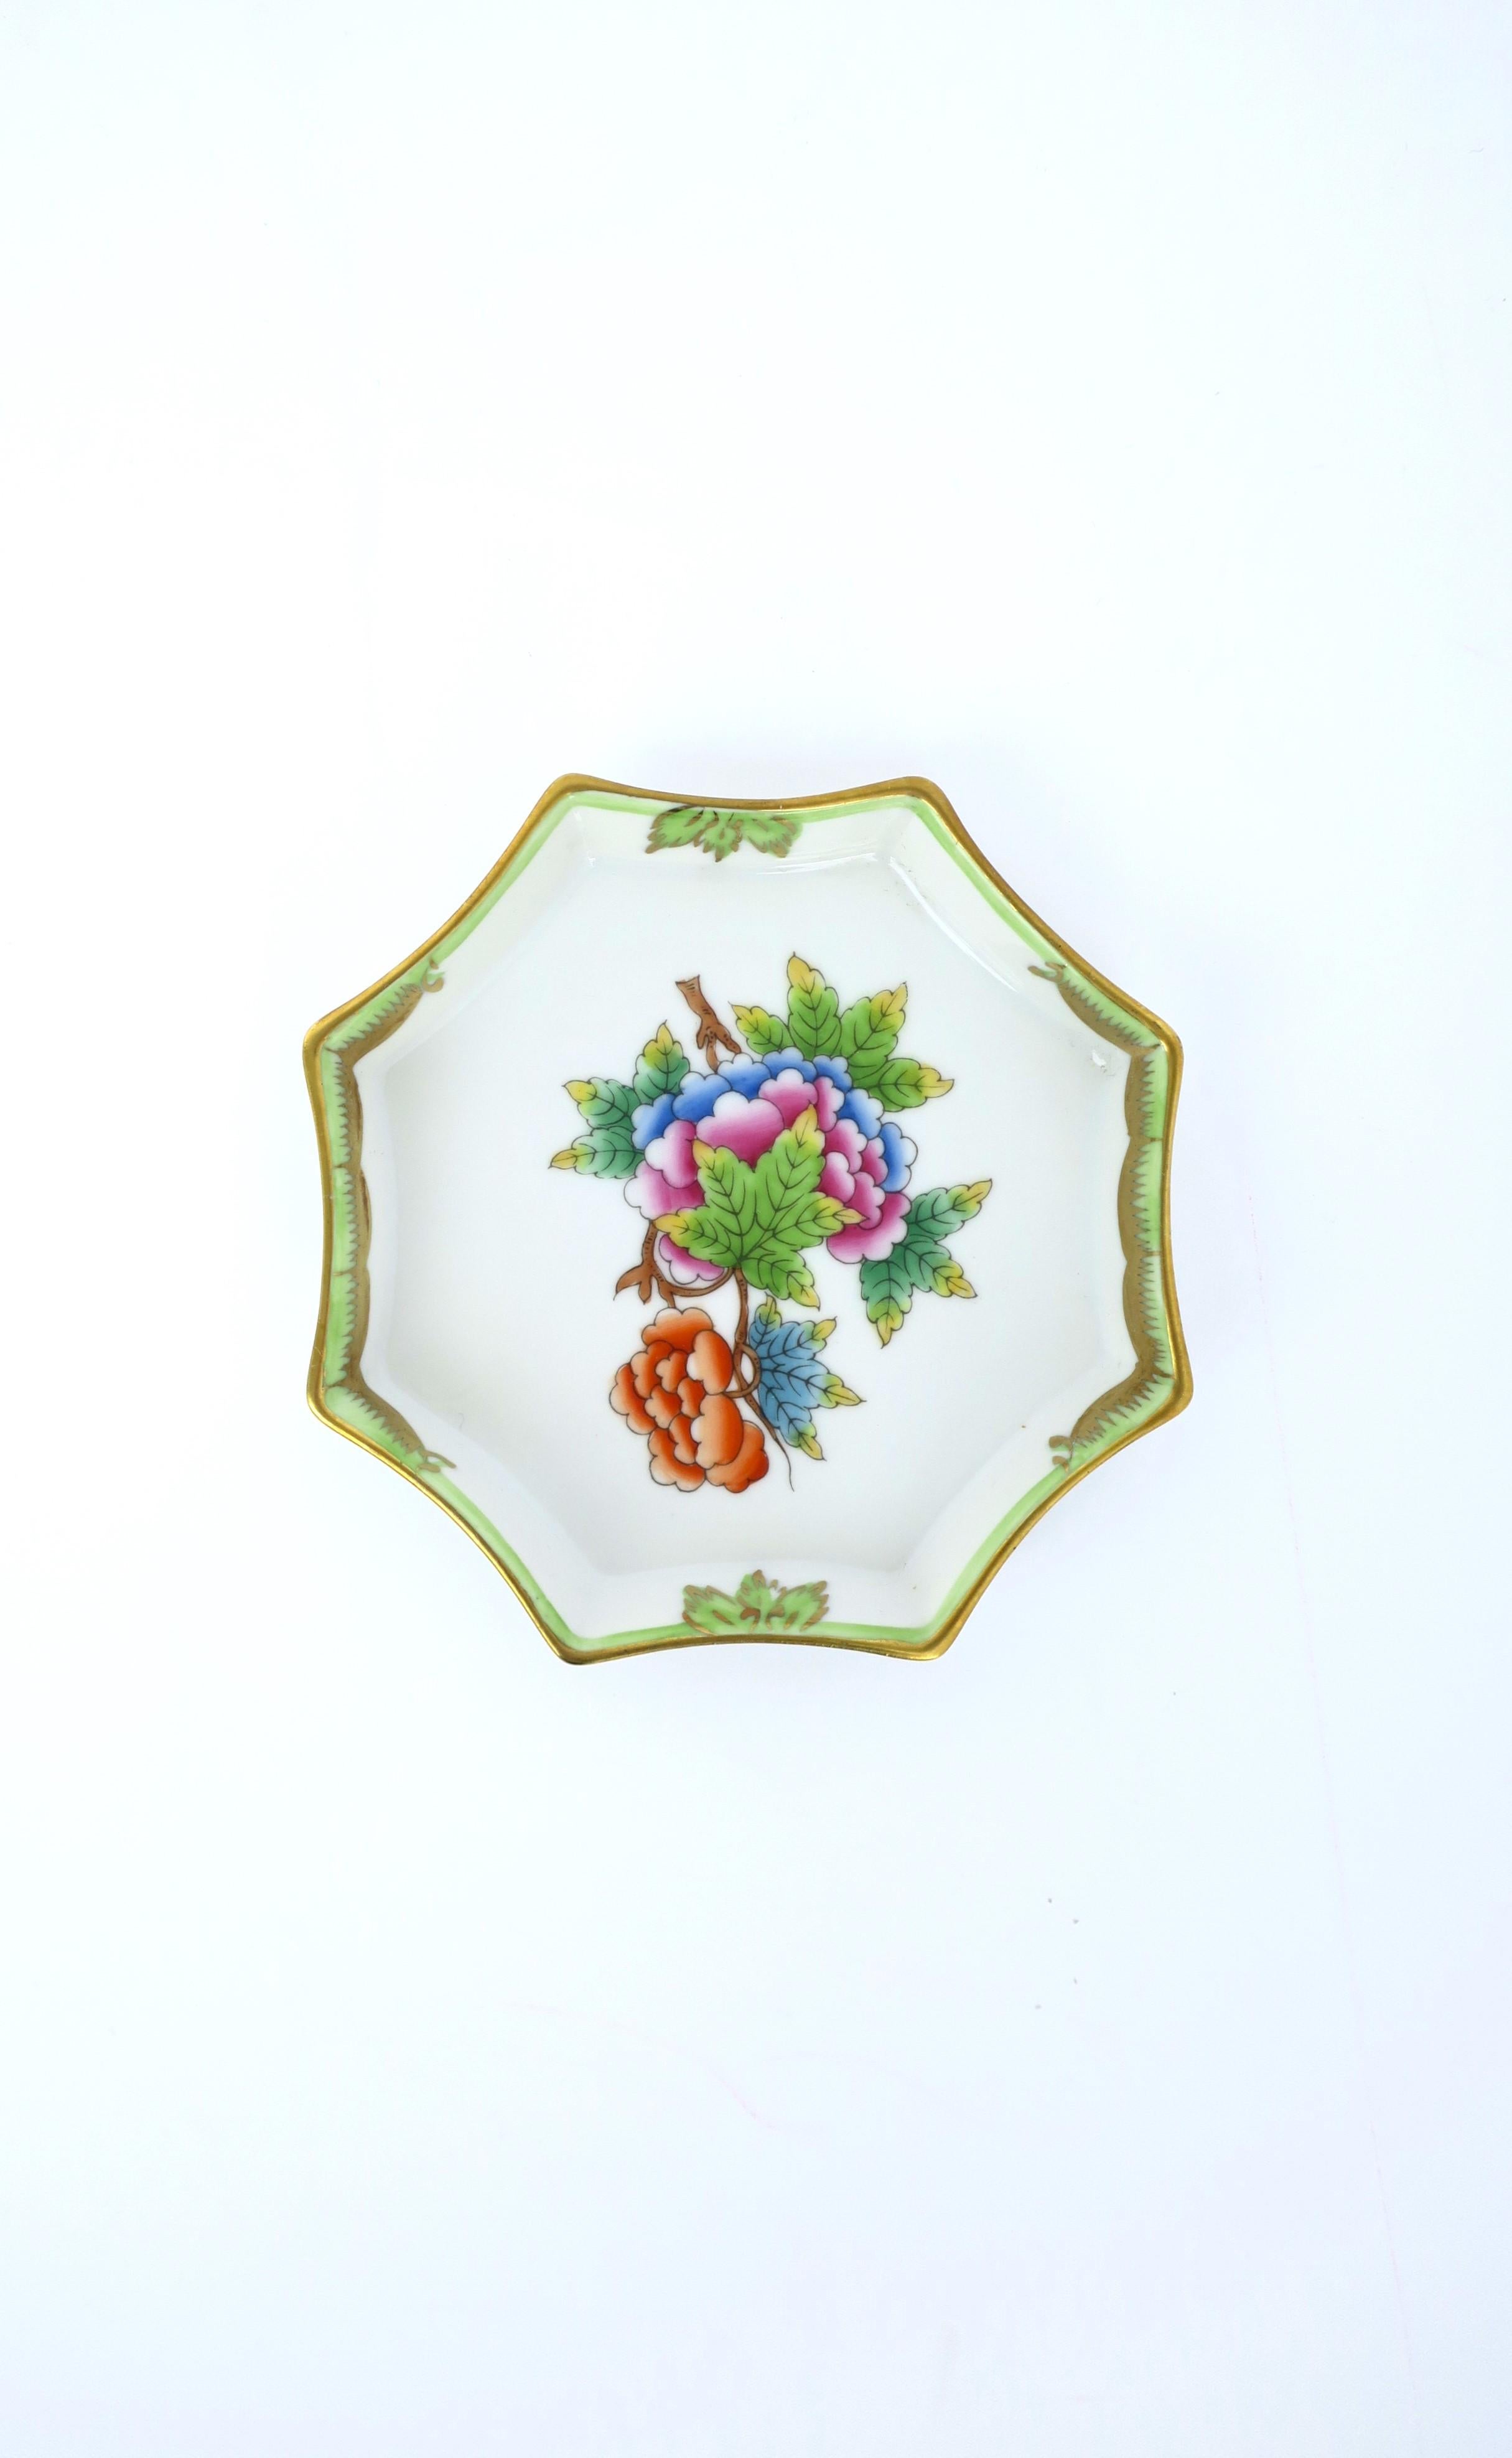 A very beautiful hand-painted octagonal porcelain jewelry dish vide-poche from luxury maker Herend, circa 20th century, Hungary. Dish is octagonal with Queen Victoria design, a floral and leaf center and decorative edge finished in gold. Colors are